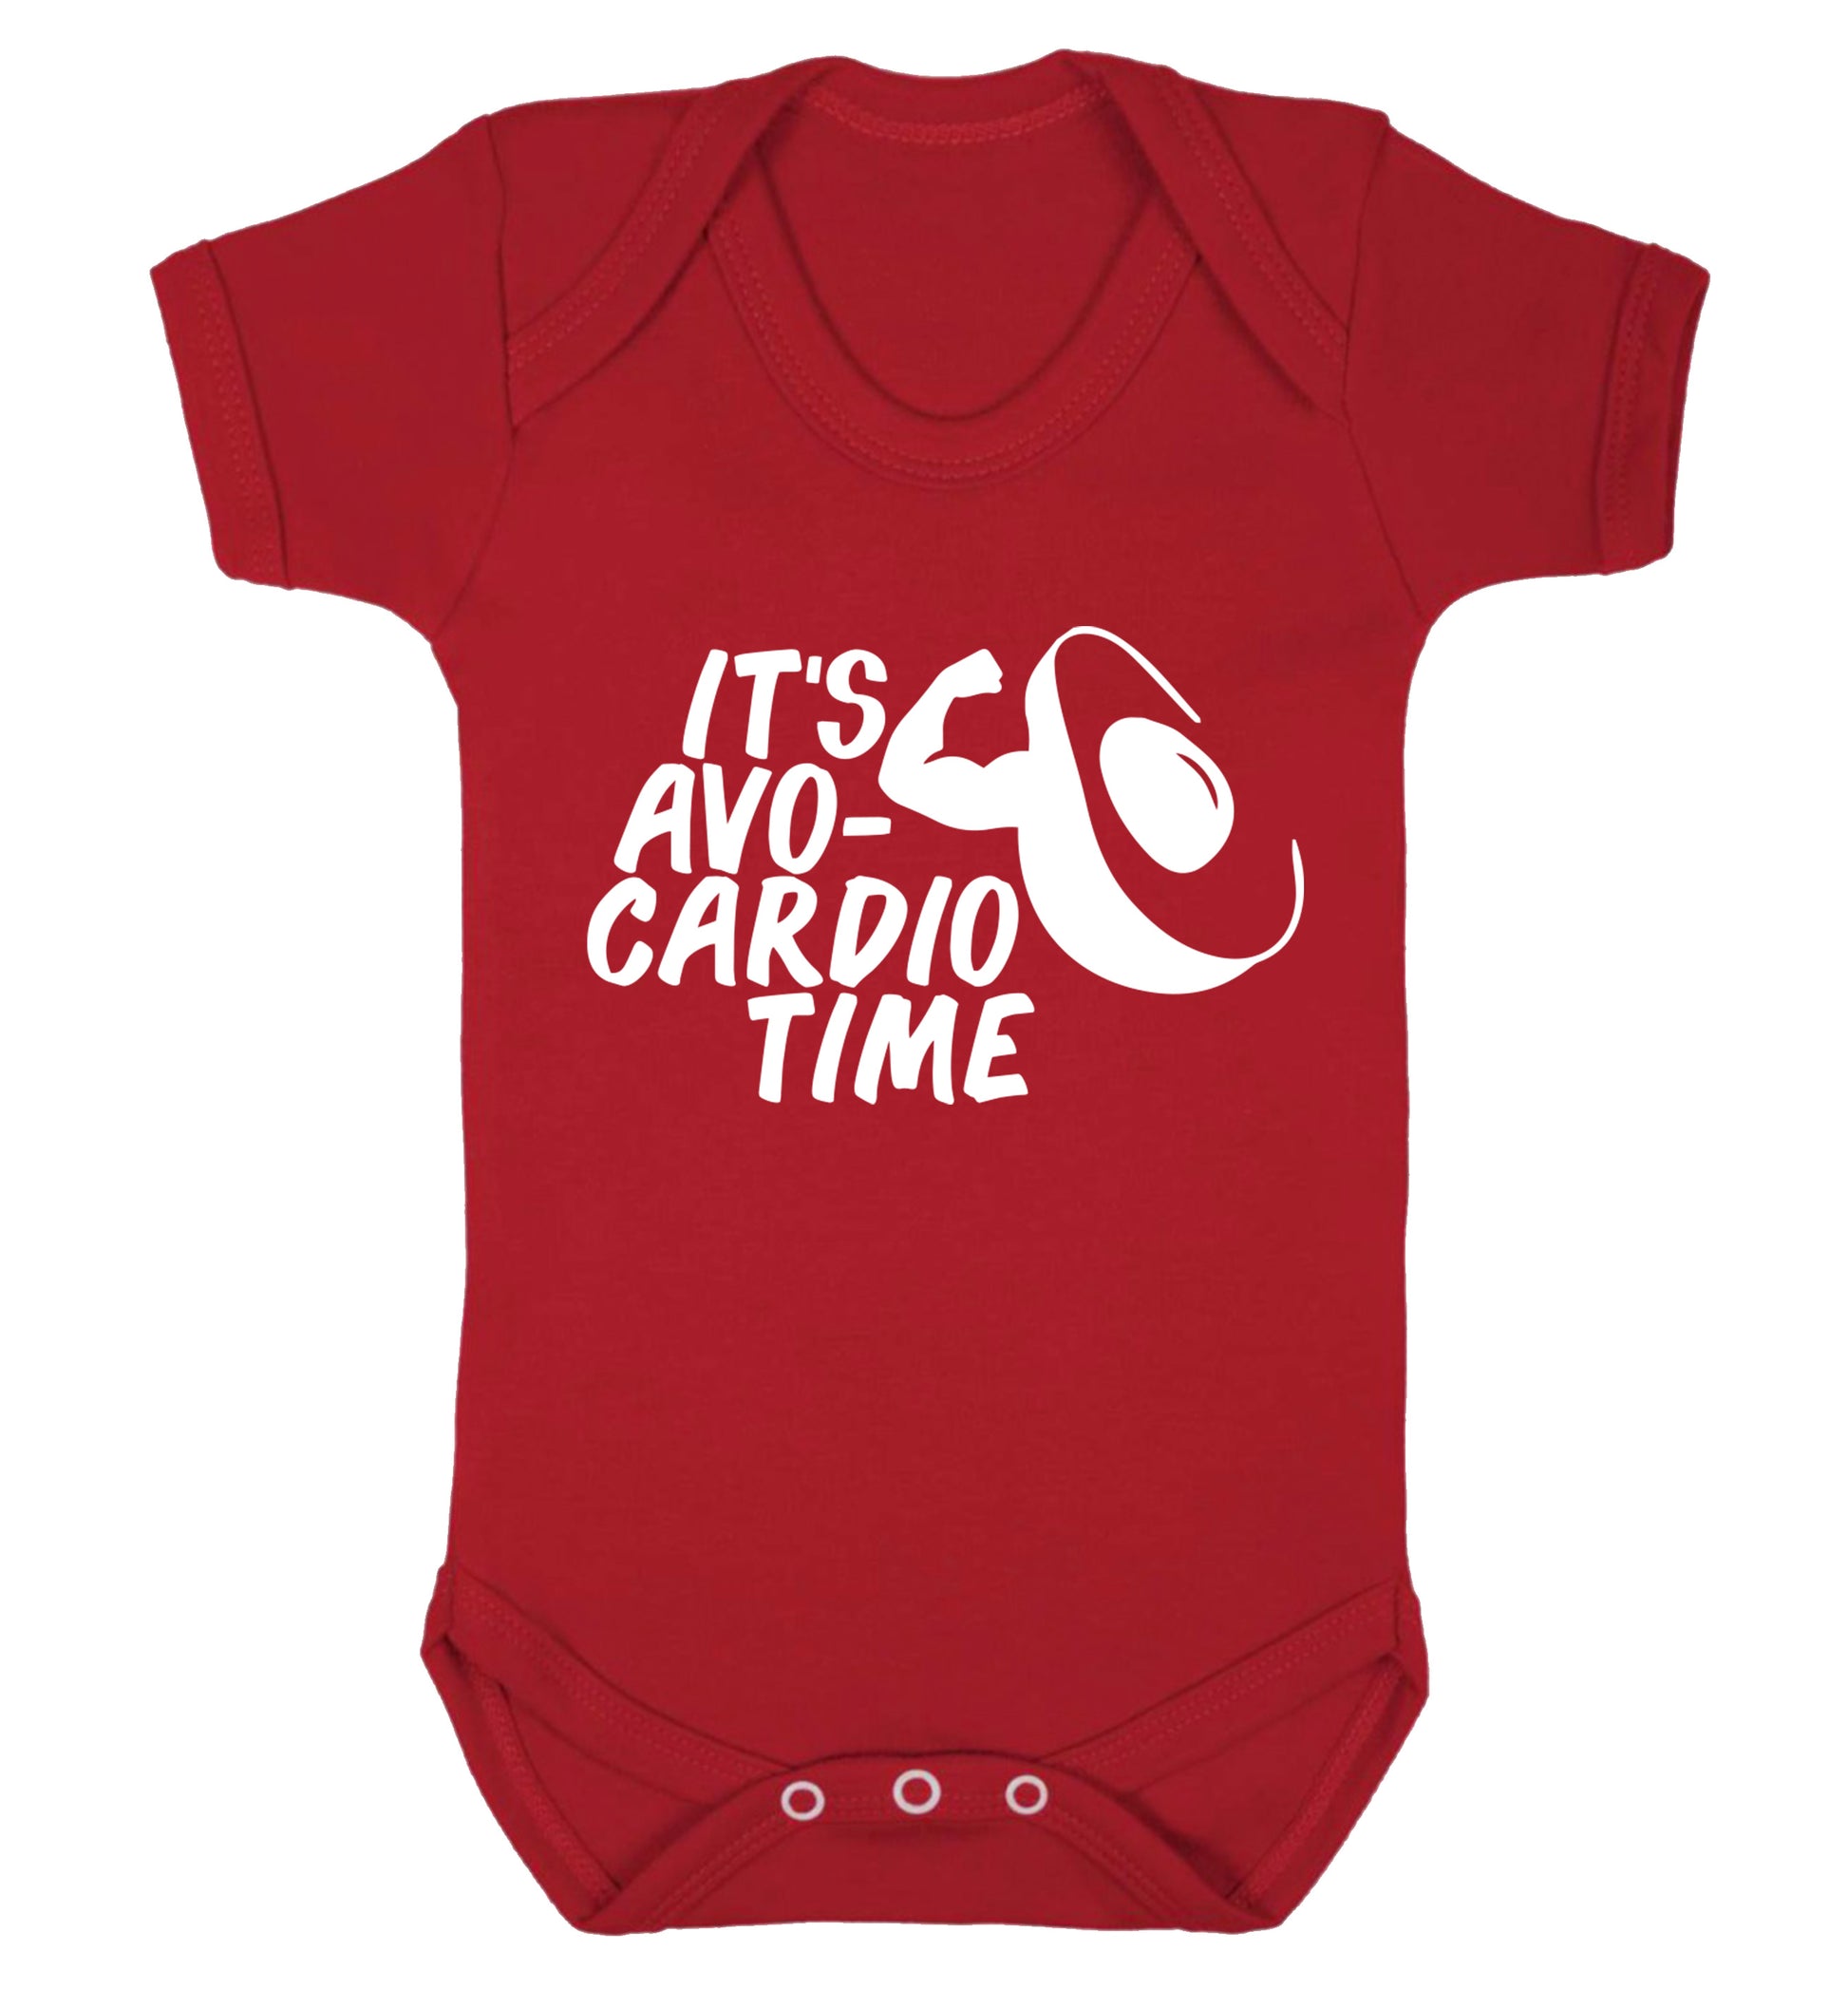 It's avo-cardio time Baby Vest red 18-24 months